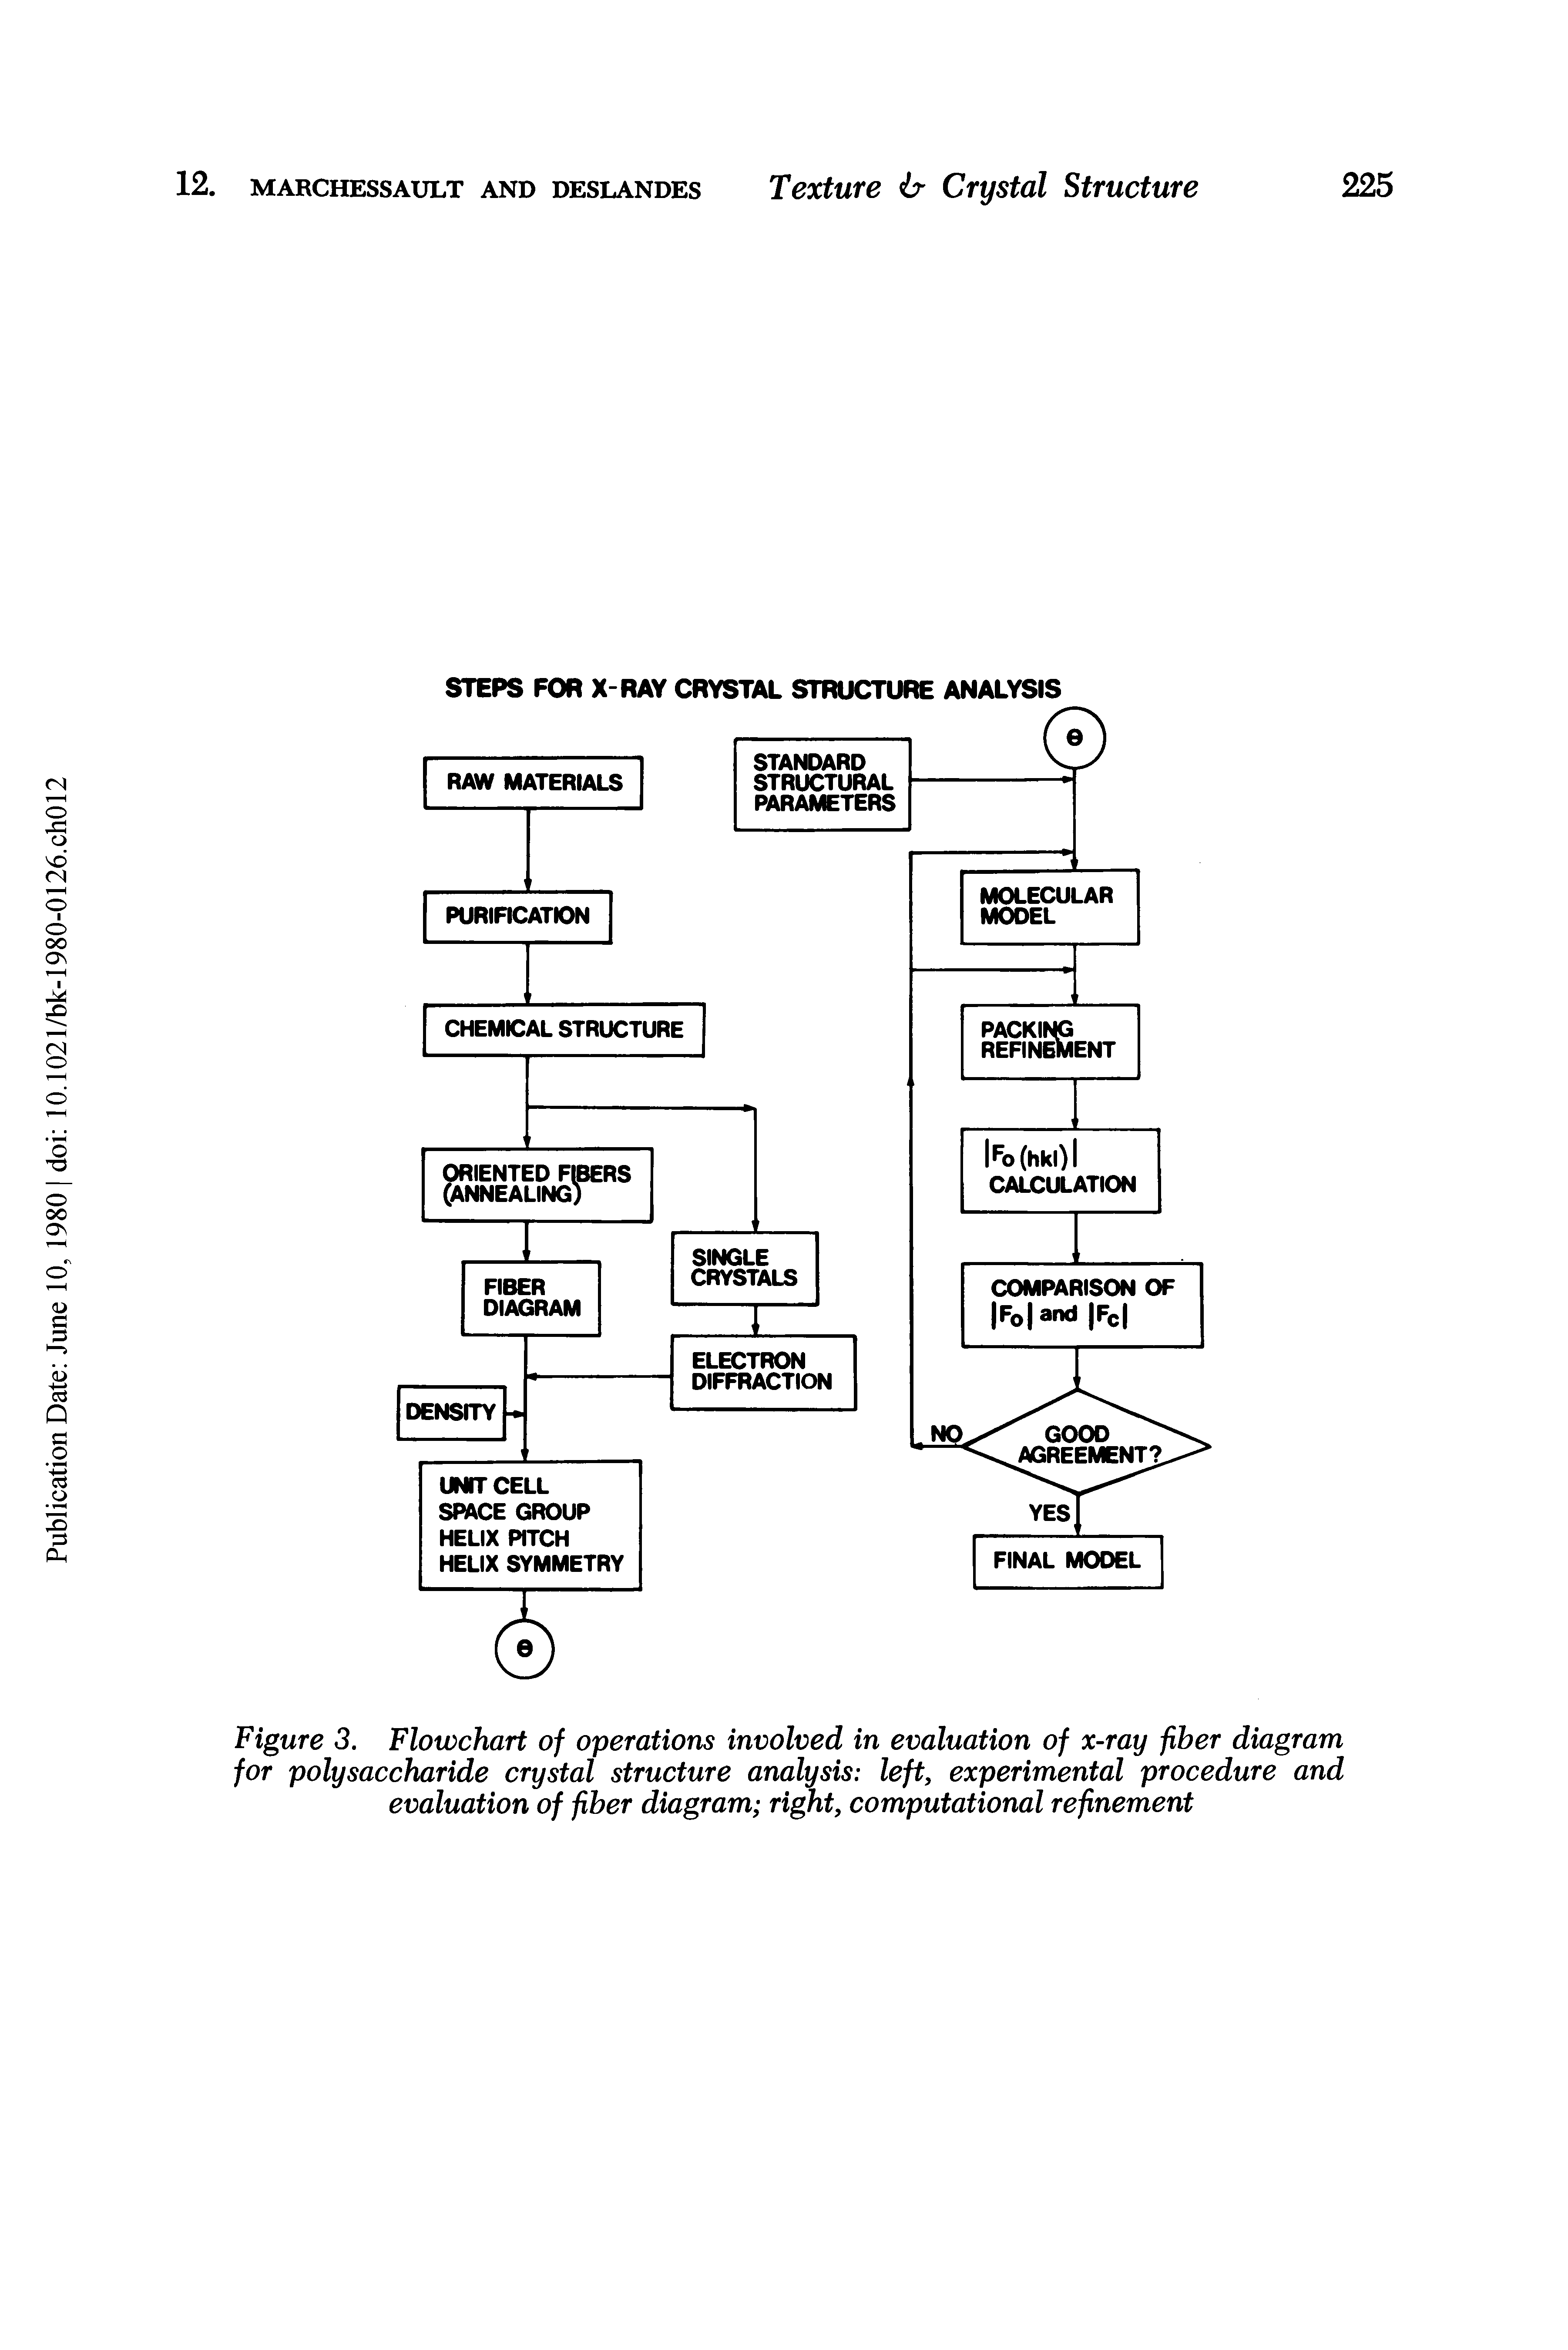 Figure 3. Flowchart of operations involved in evaluation of x-ray fiber diagram for polysaccharide crystal structure analysis left, experimental procedure and evaluation of fiber diagram right, computational refinement...